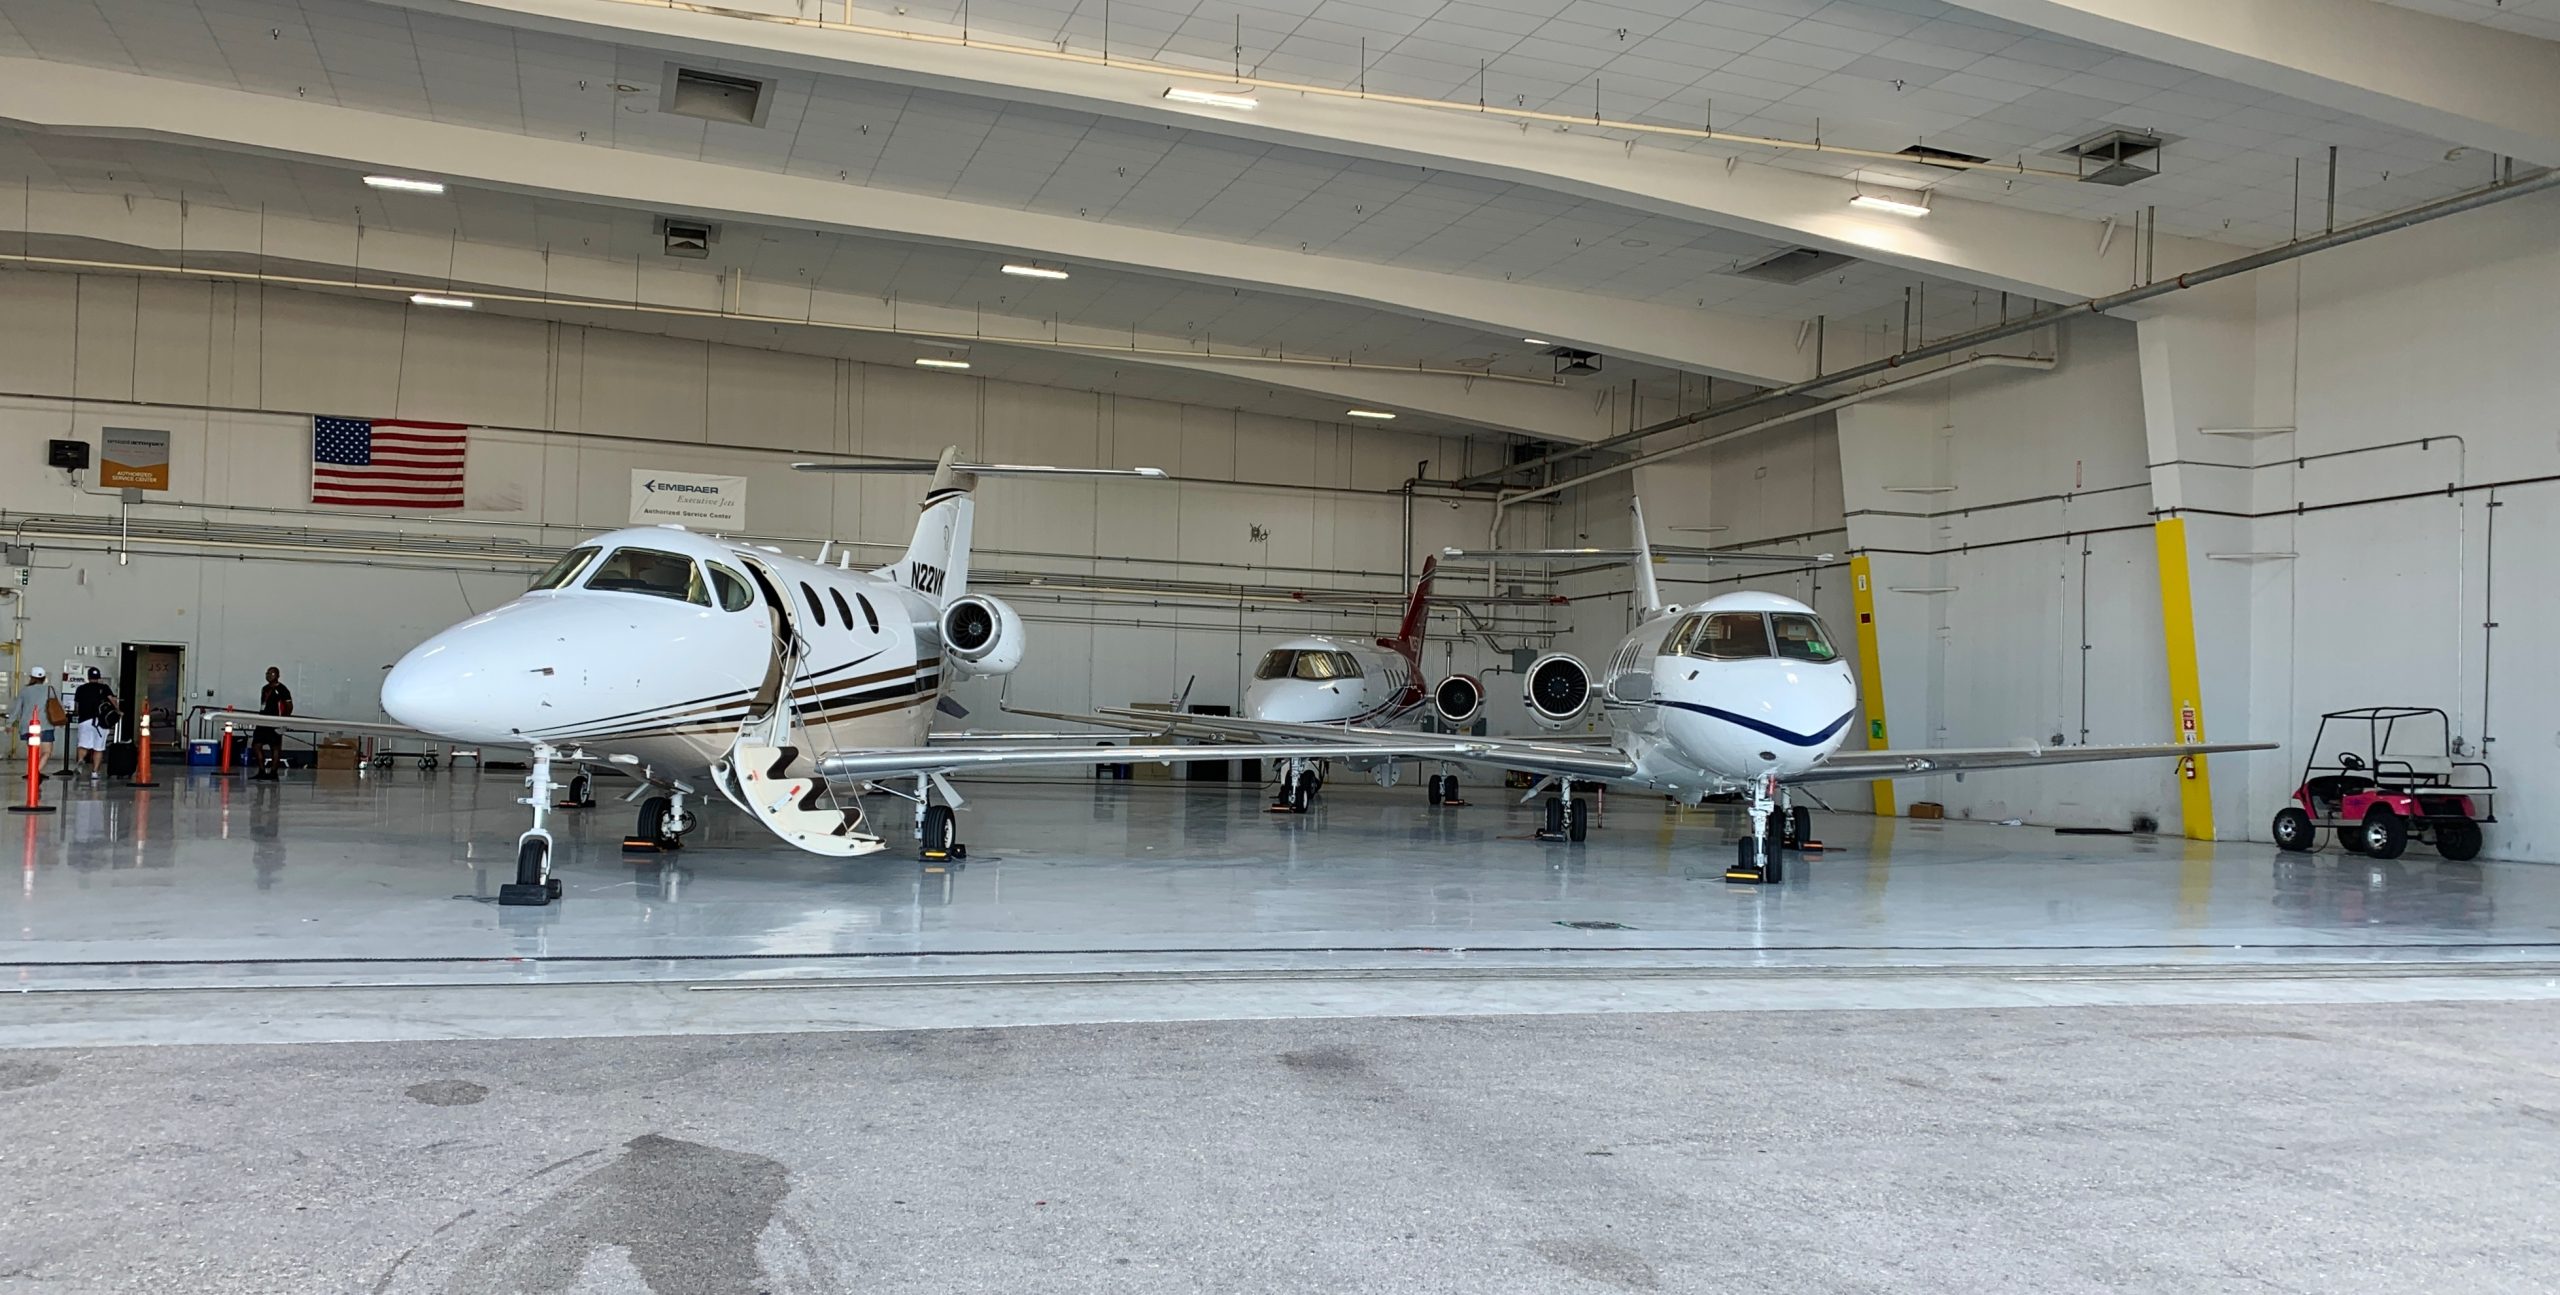 three-private-jets-in-an-airport-hanger-one-jet-p-2022-11-16-18-03-47-utc